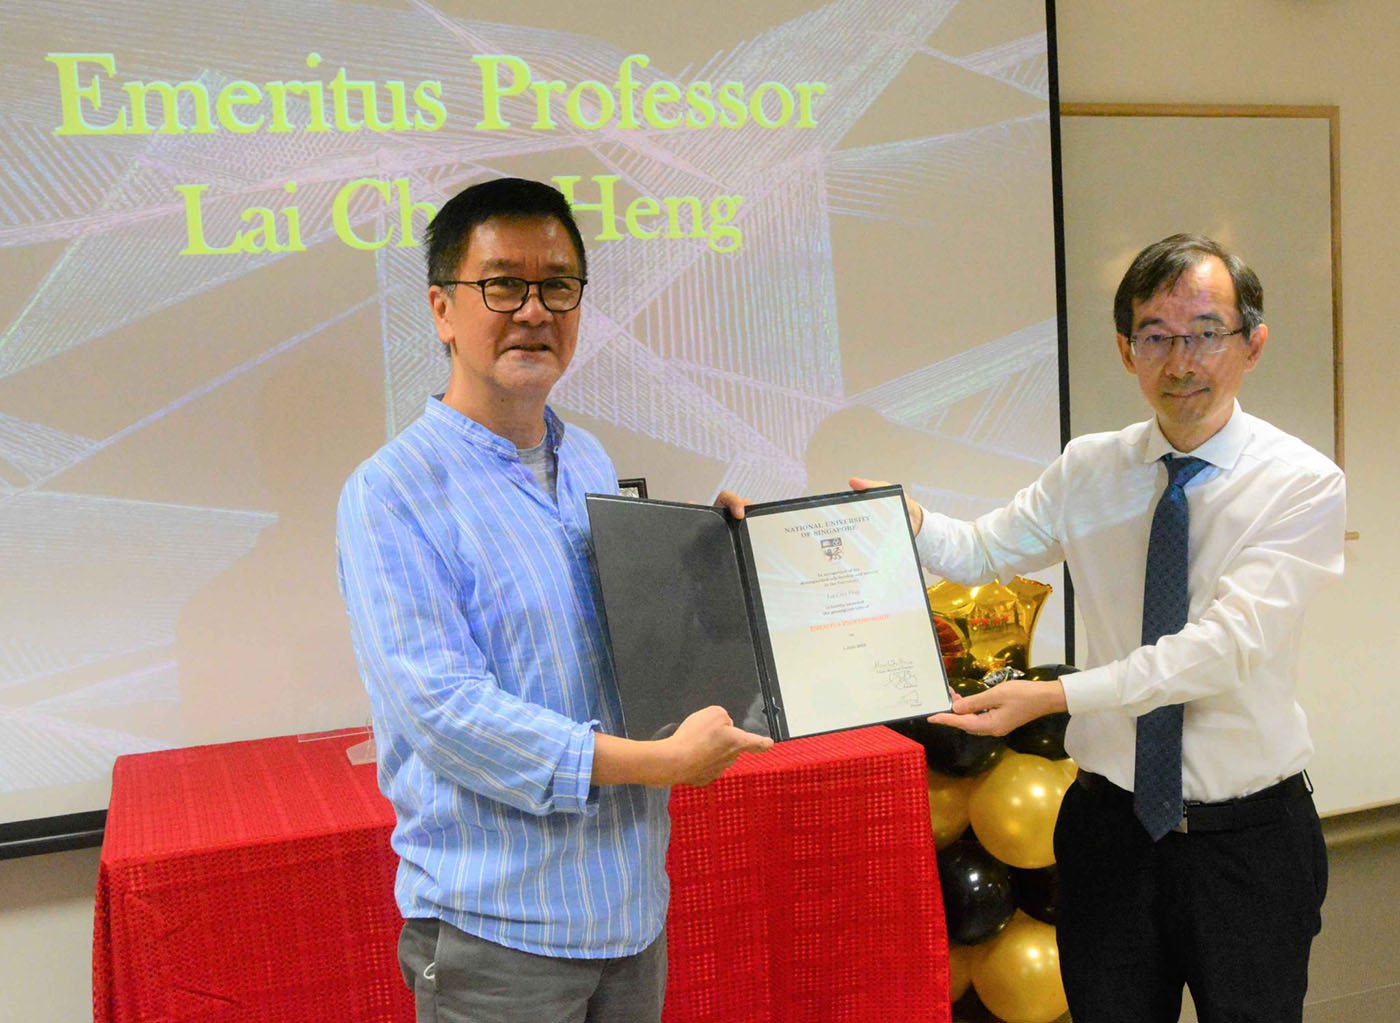 NUS physicists Lai Choy Heng and Gong Jiangbin stand holding a certificate between them. 